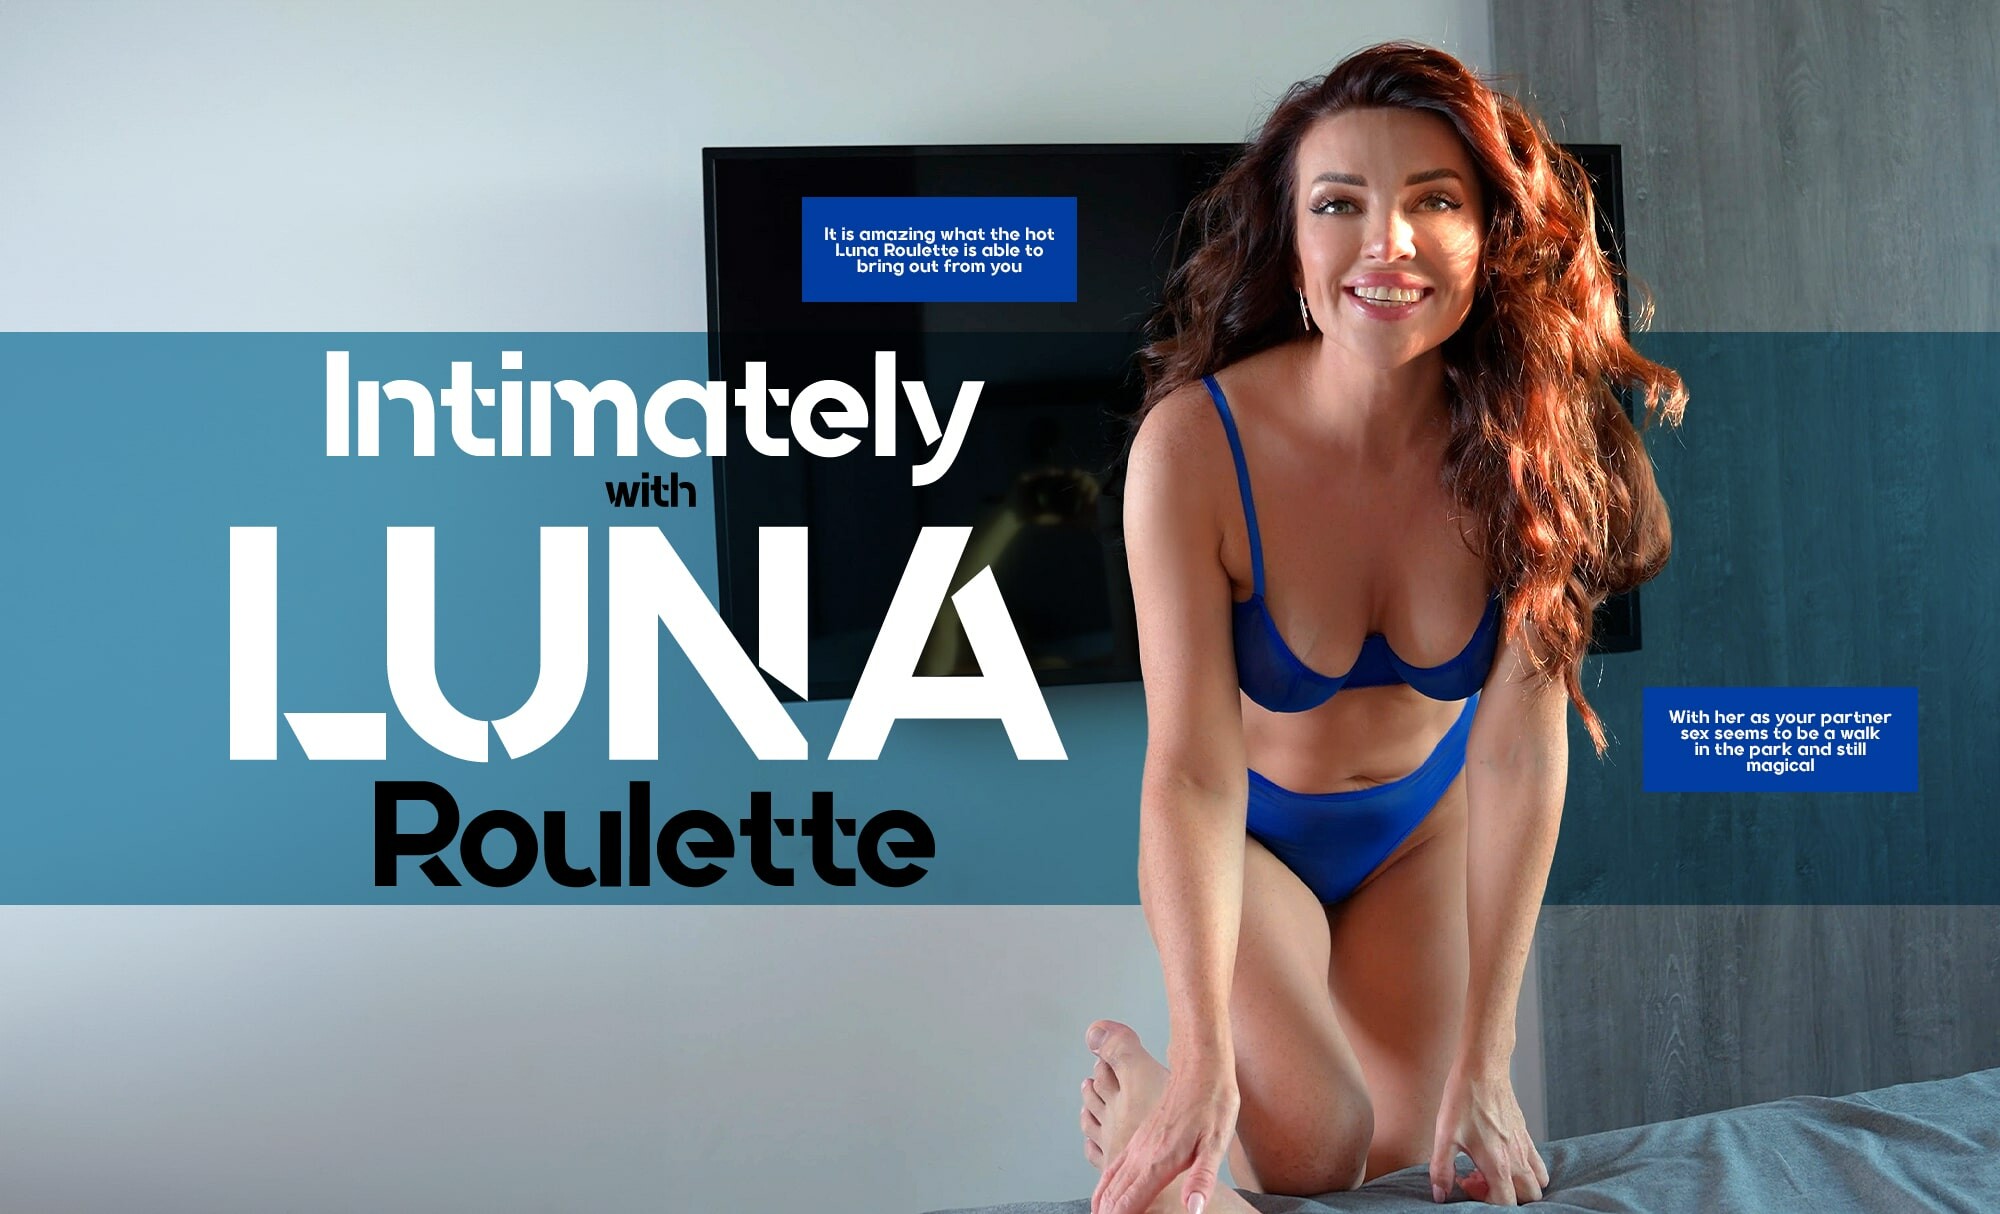 Luna Roulette Intimately with Luna Roulette LifeSelector